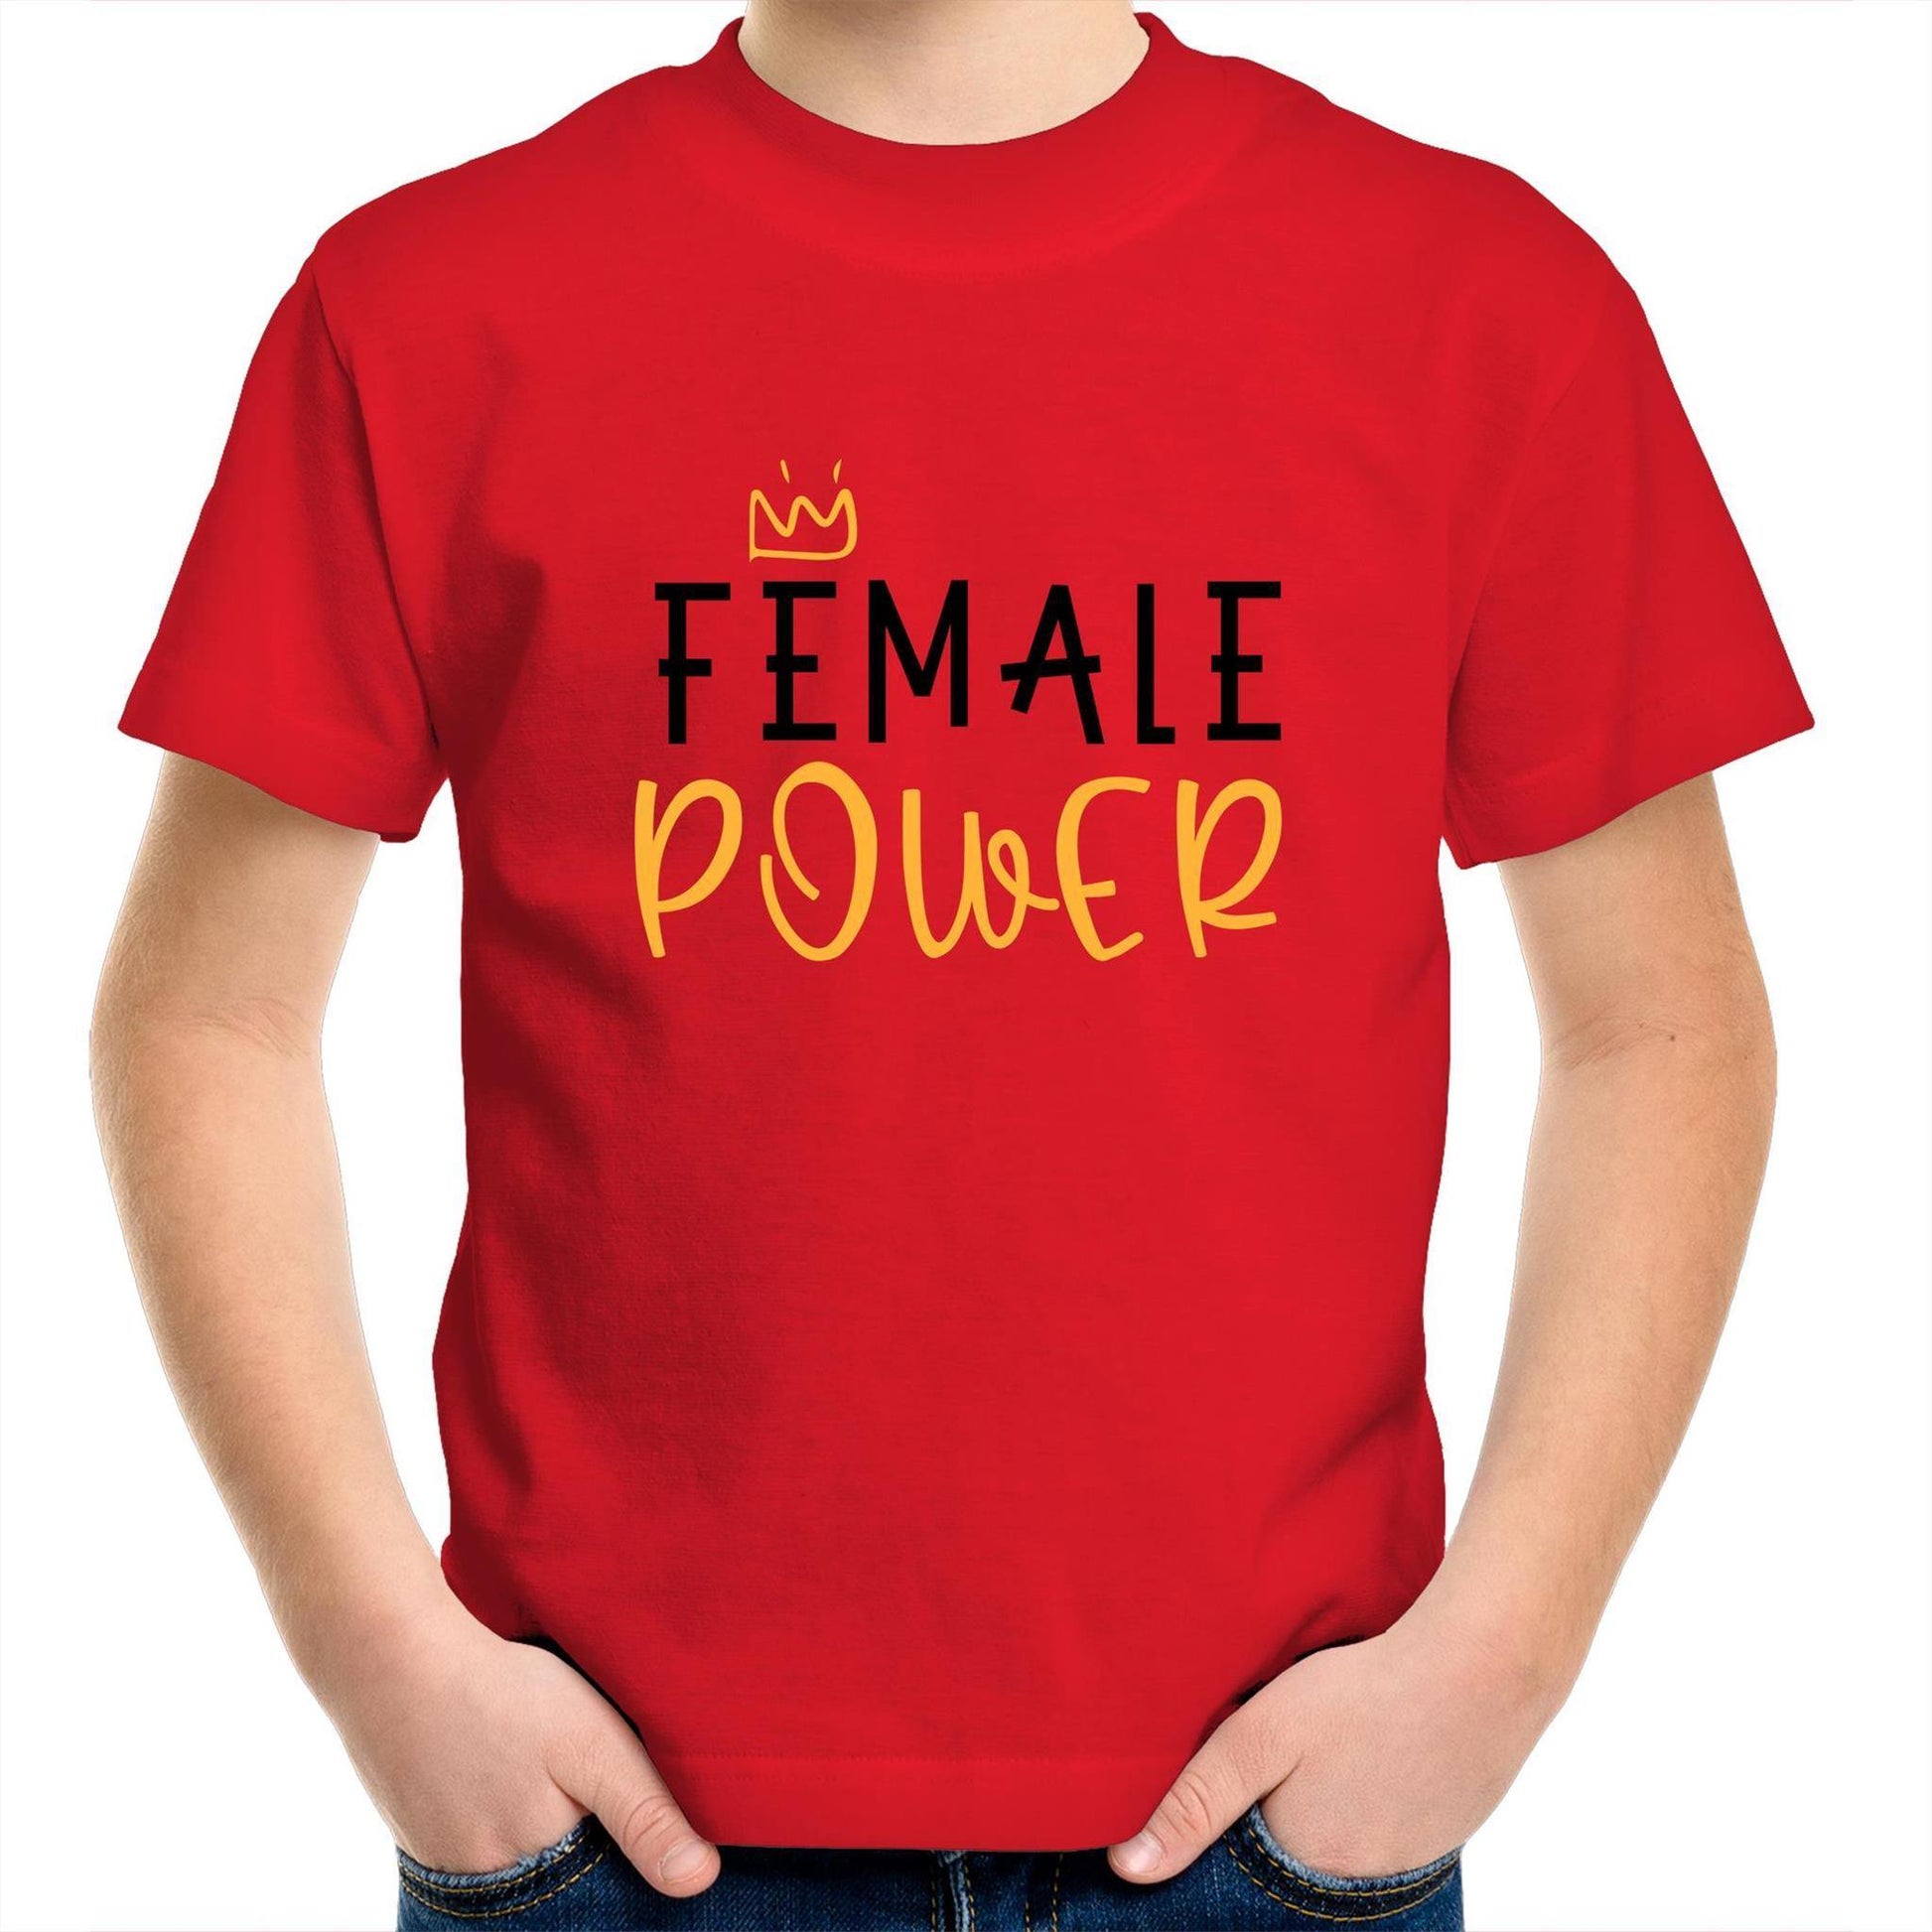 Female Power - Kids Youth Crew T-Shirt Red Kids Youth T-shirt